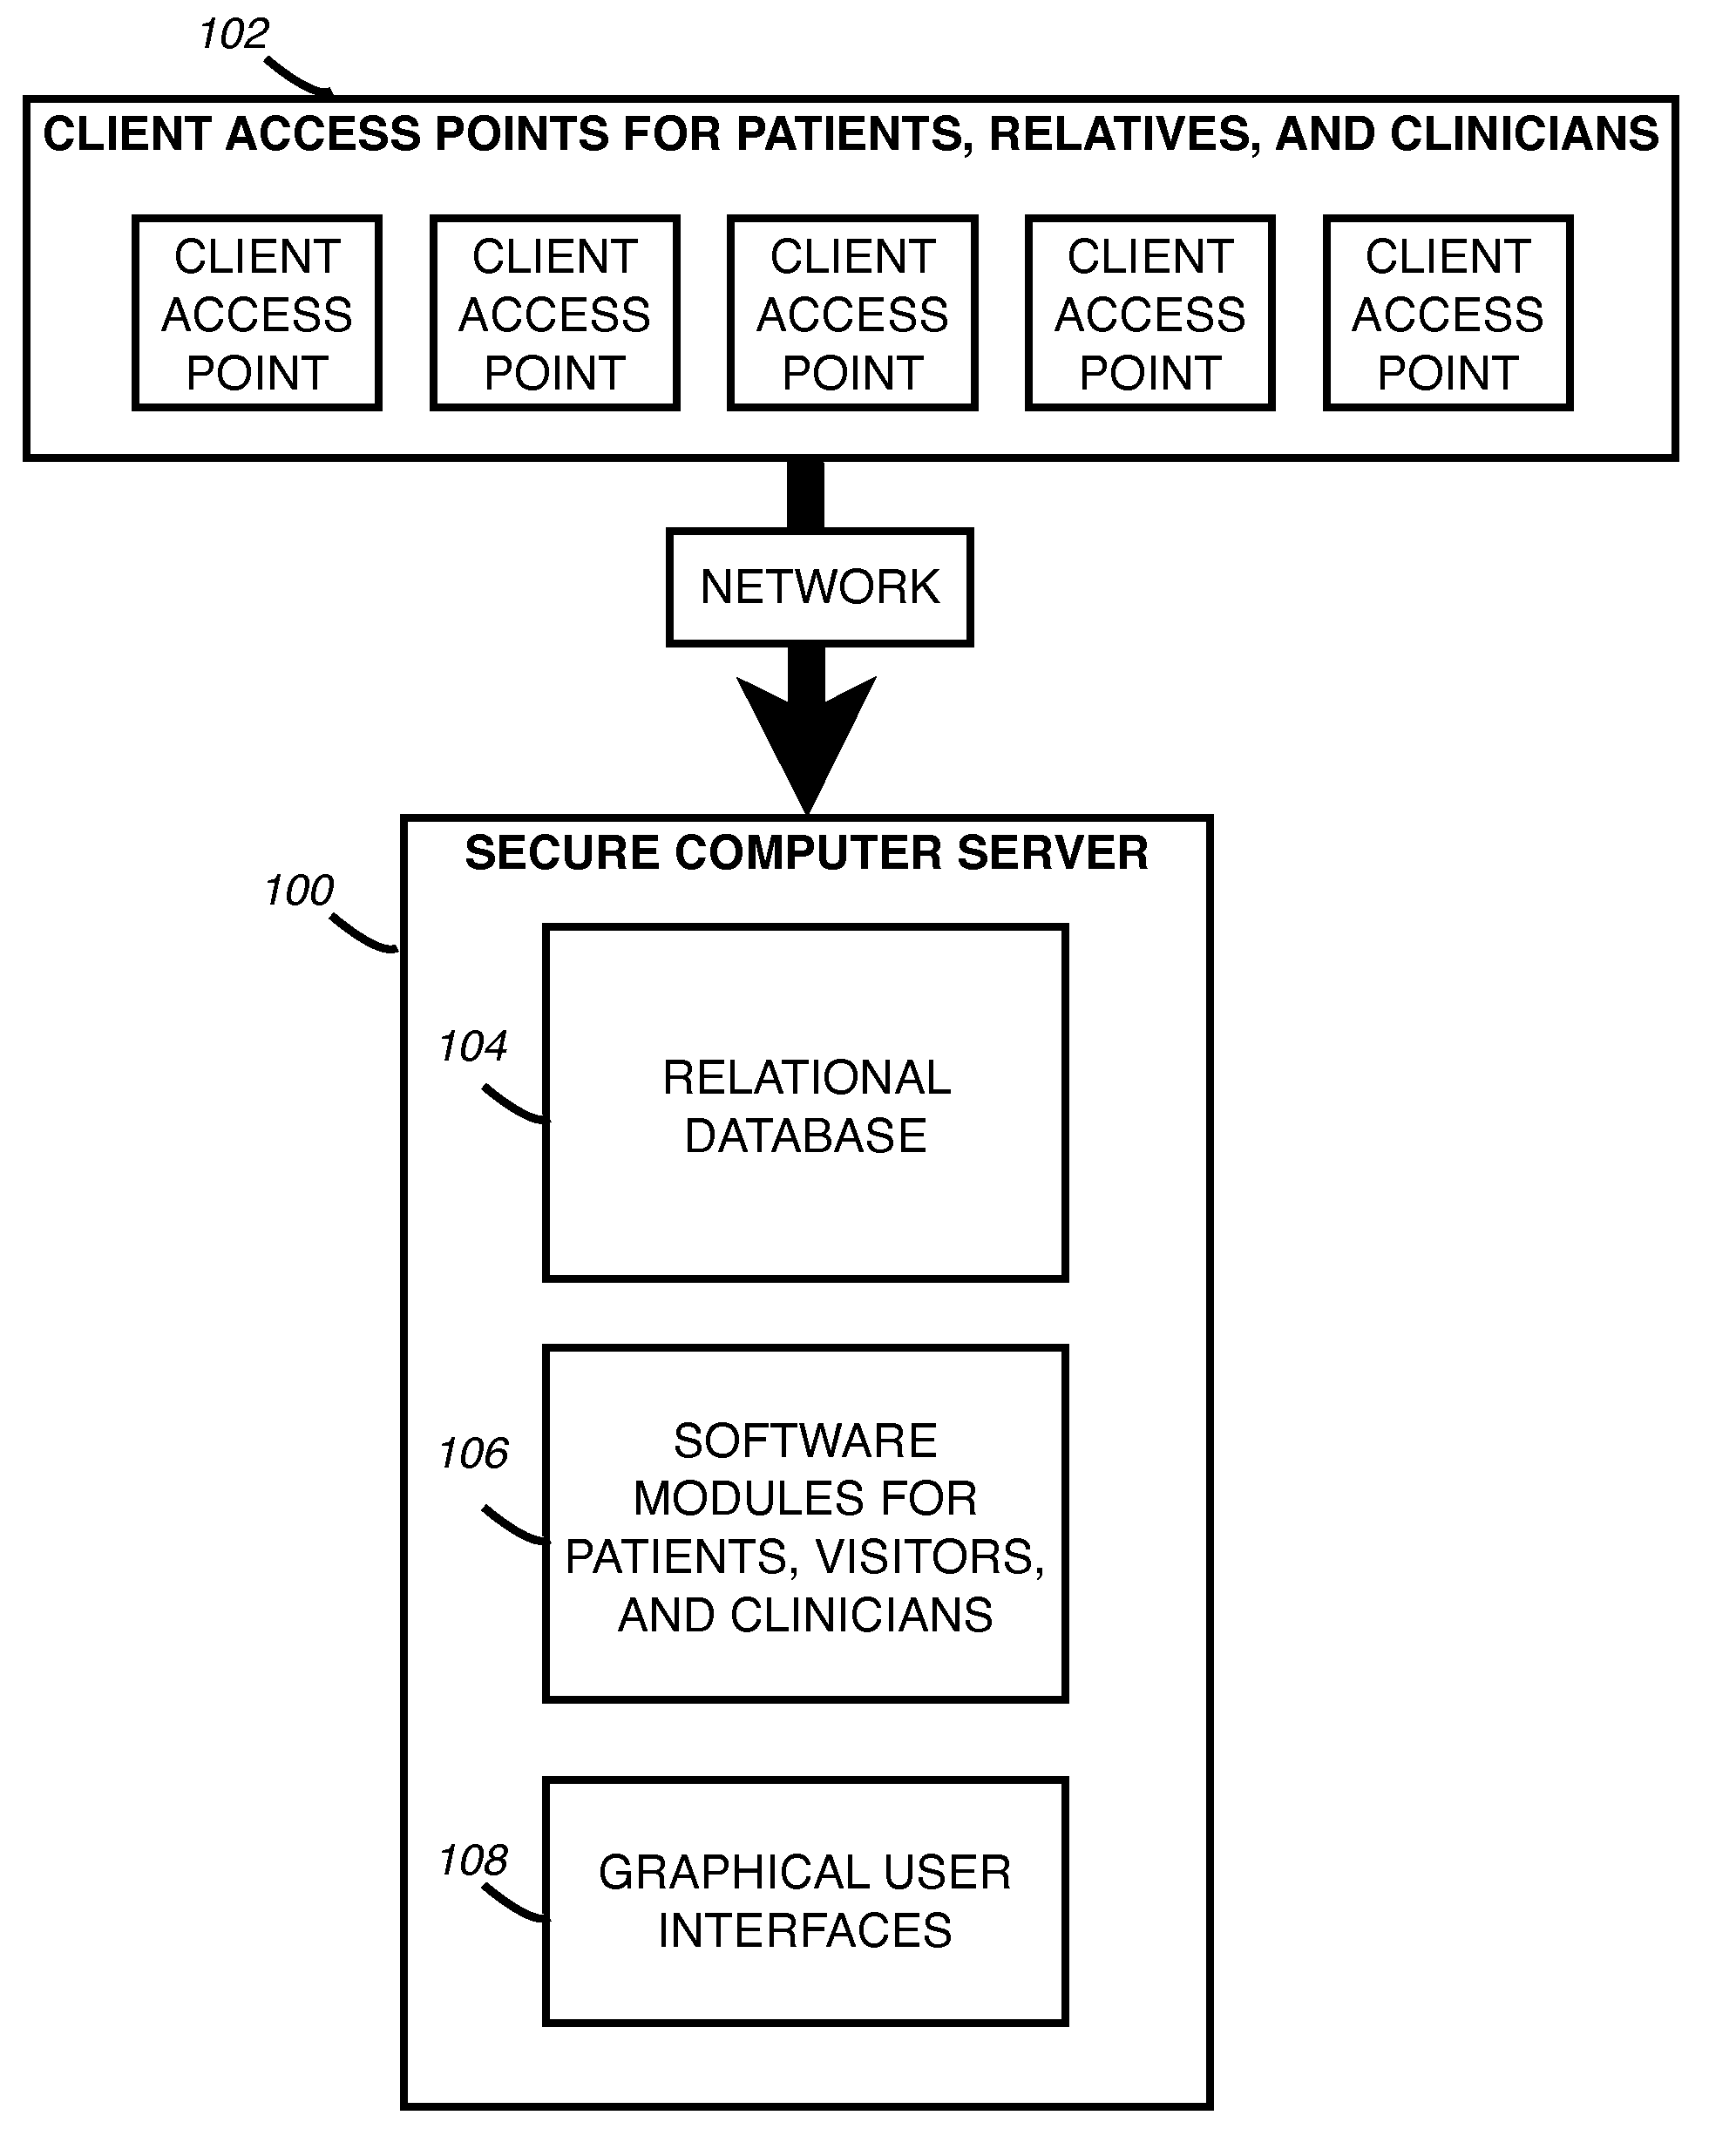 Communication System for Remote Patient Visits and Clinical Status Monitoring